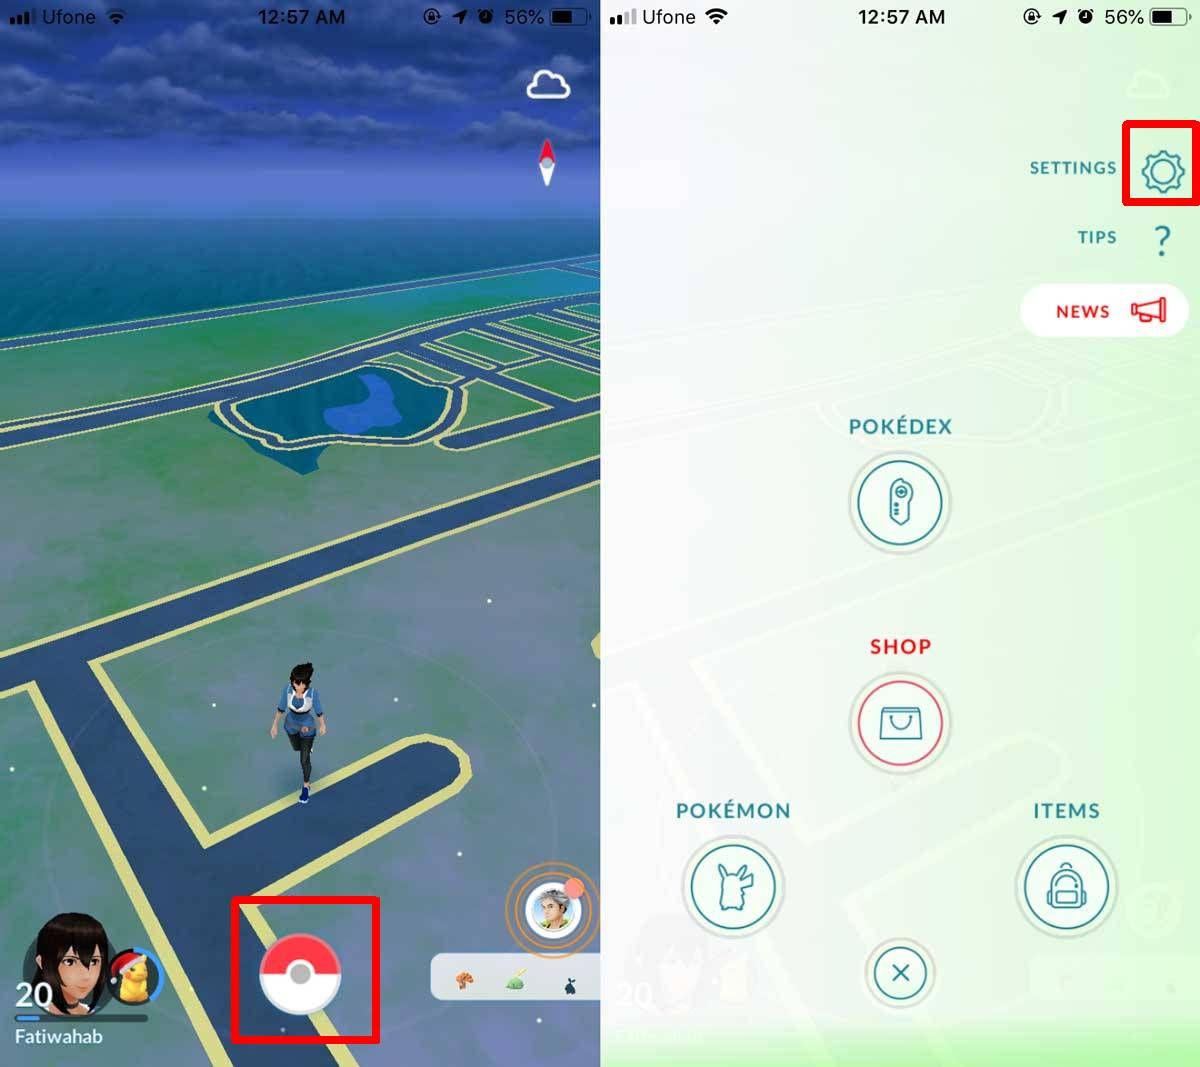 How to add Facebook friends on Pokémon Go (With images)